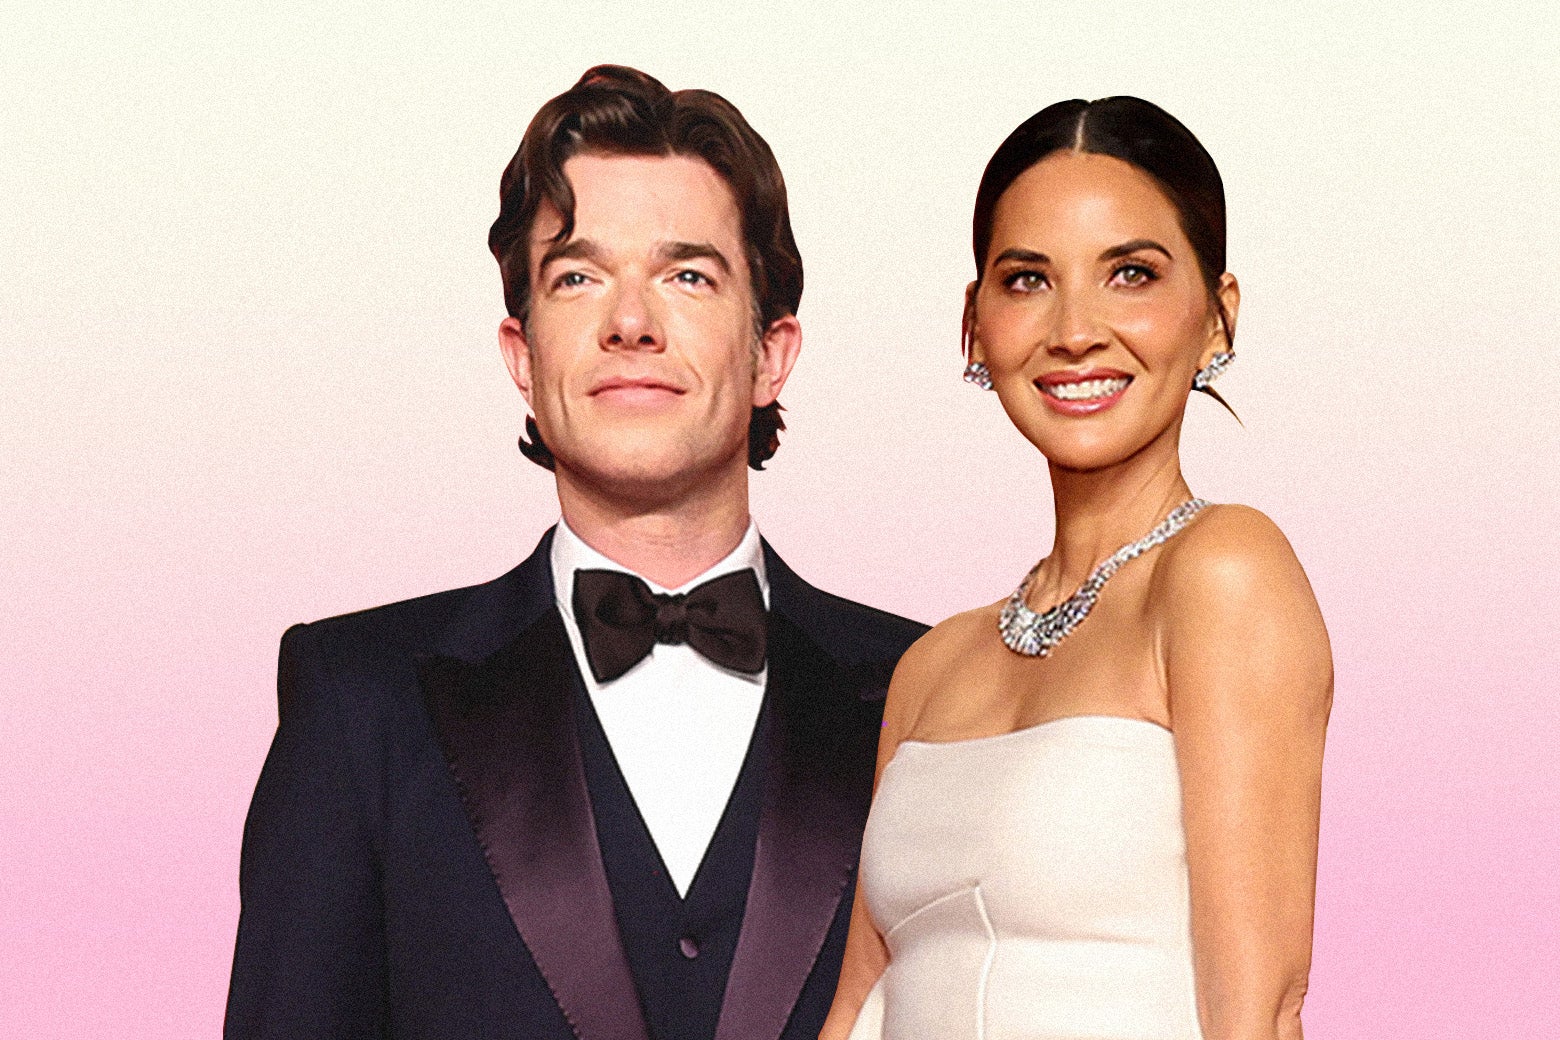 John Mulaney and Olivia Munn, against a pink gradient background.